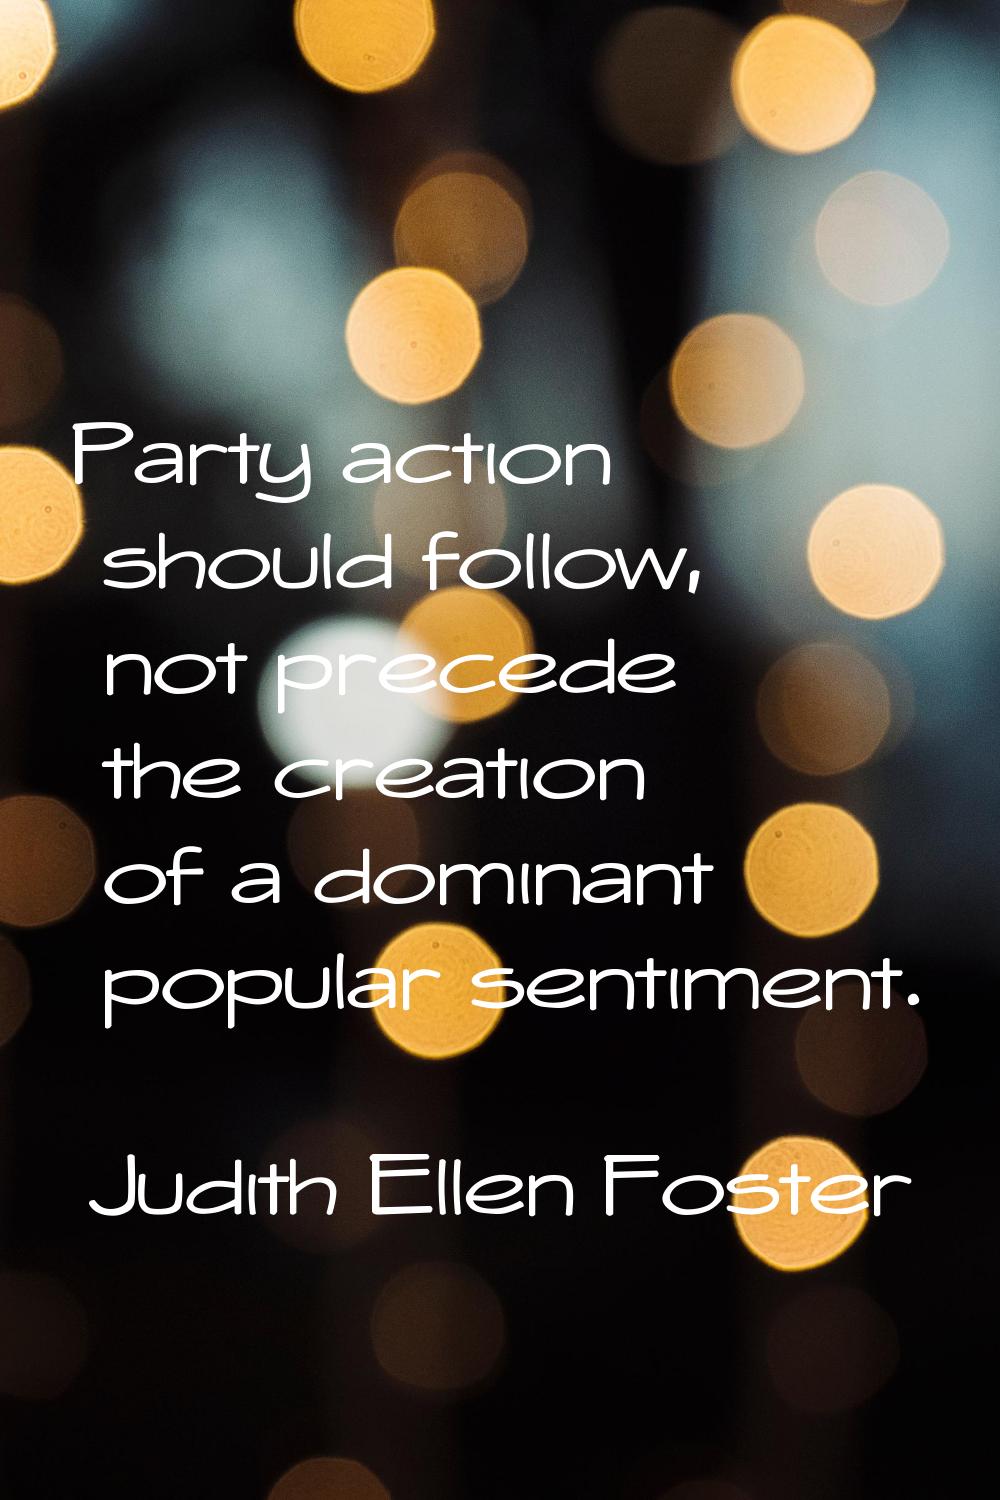 Party action should follow, not precede the creation of a dominant popular sentiment.